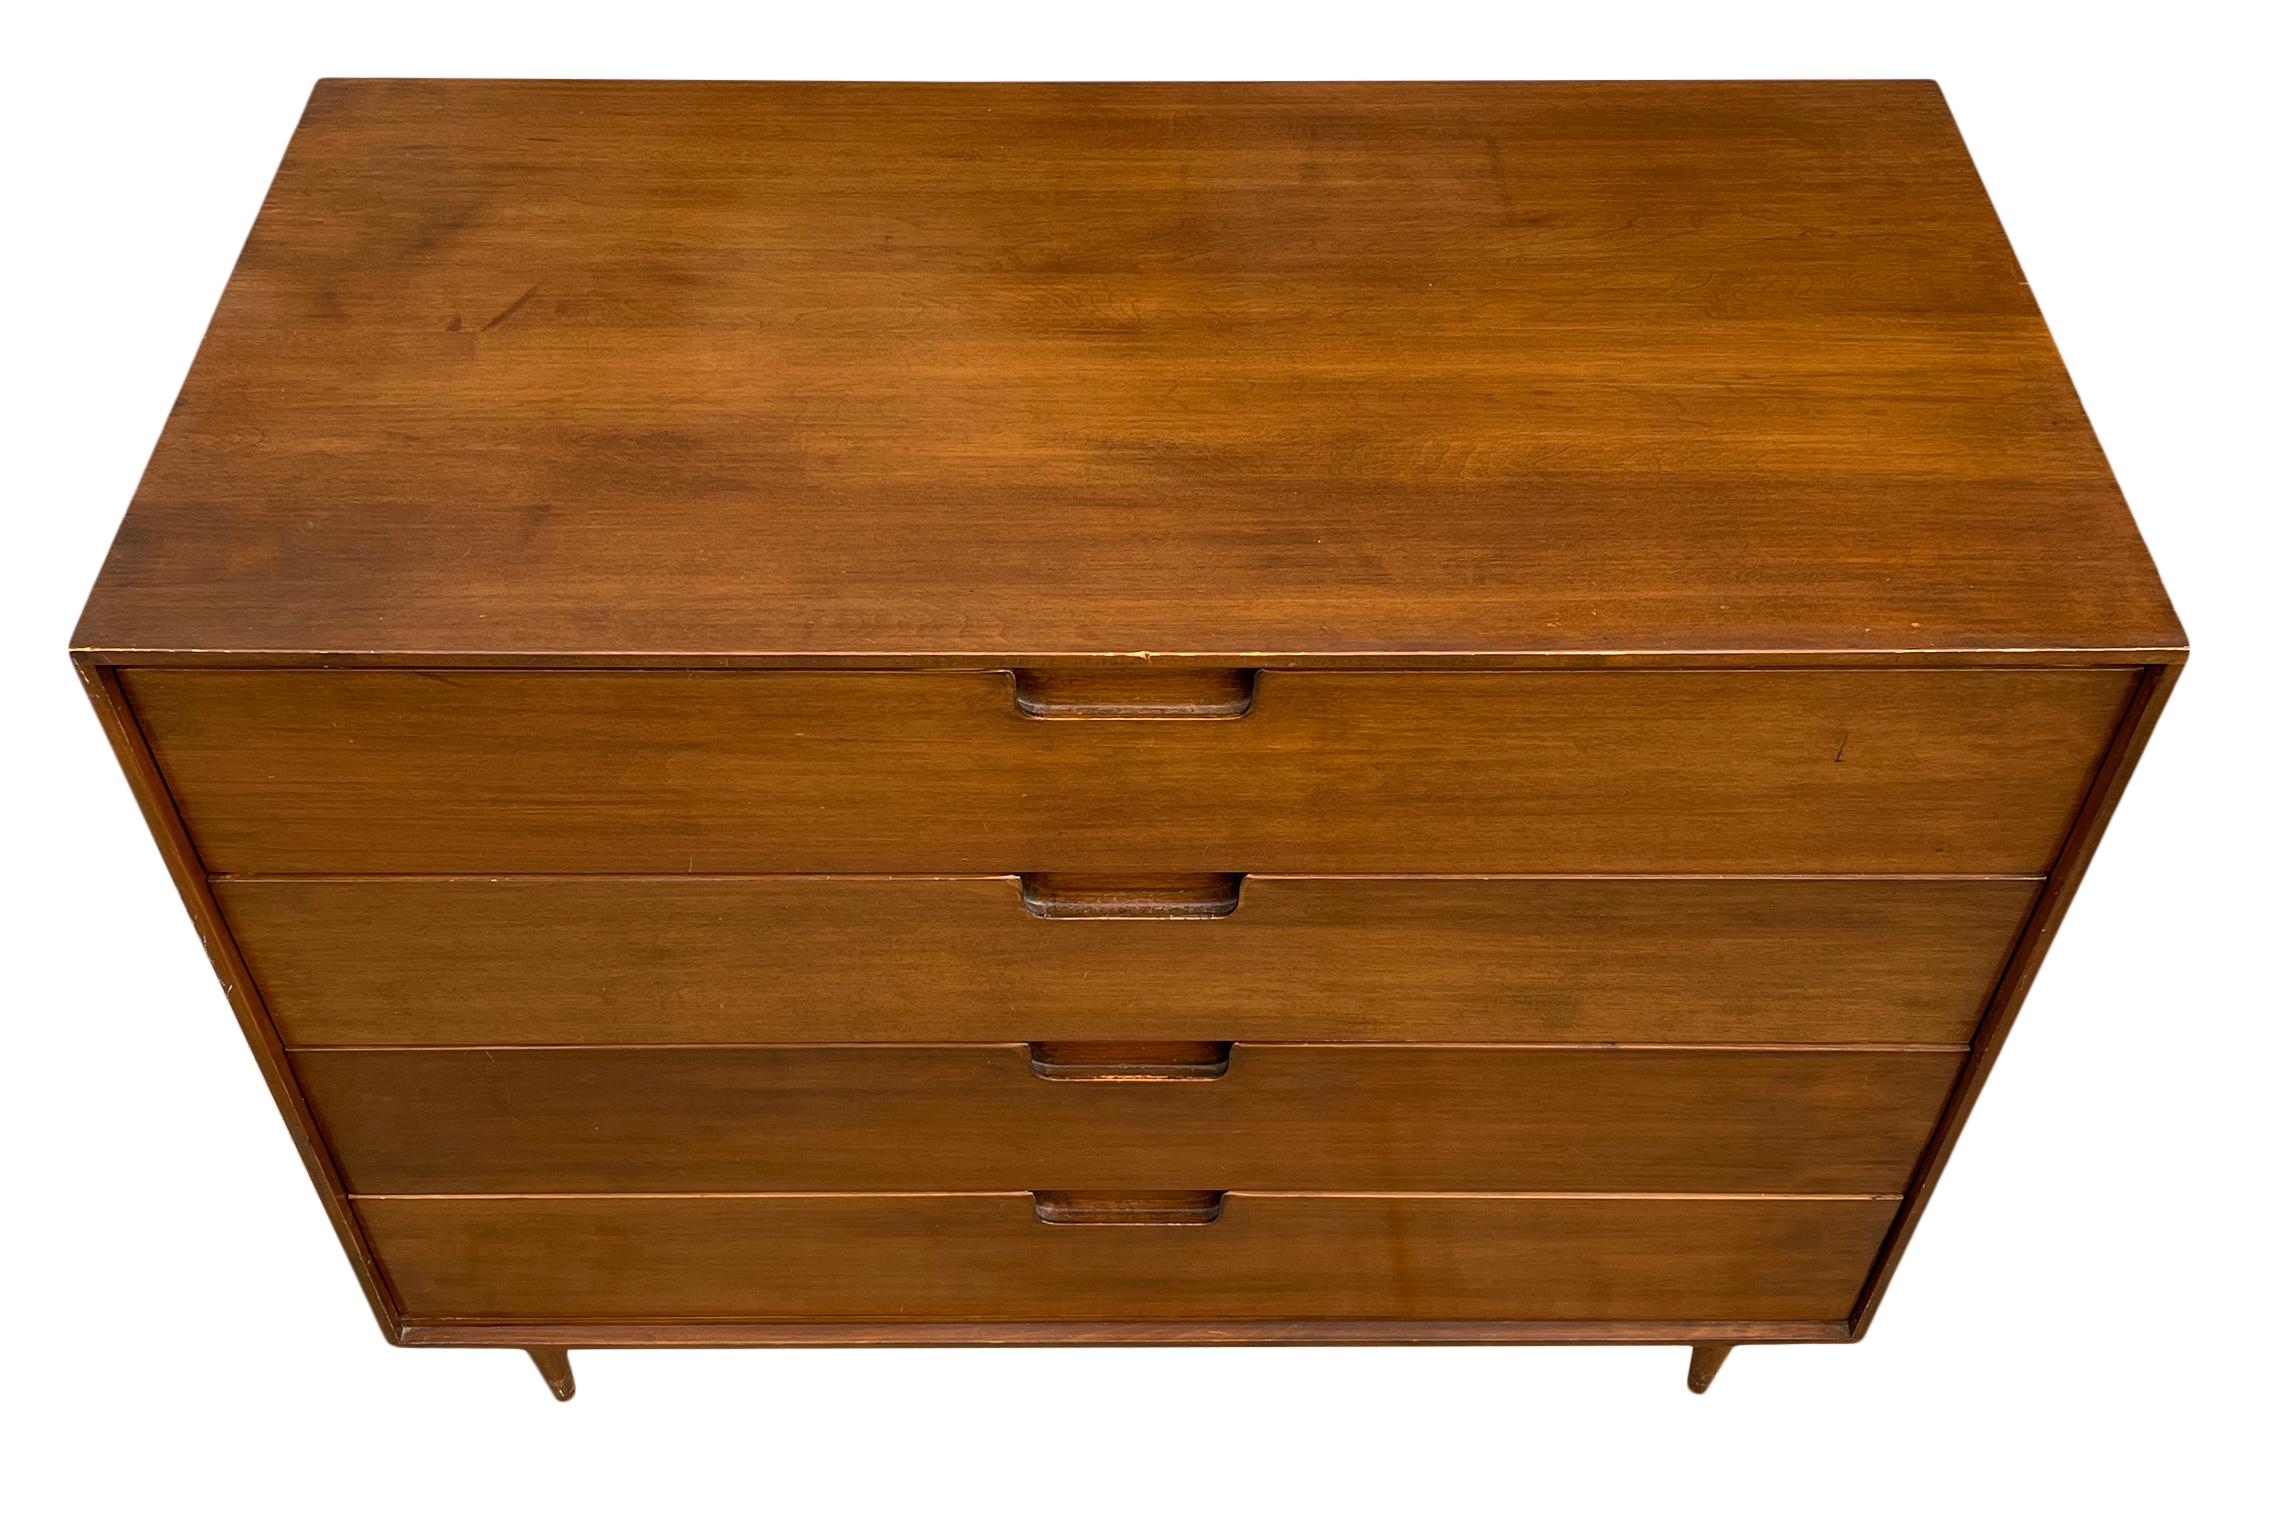 Mid century 4 drawer dresser low walnut finish on small tapered legs. No label solid wood very sturdy and drawers and dresser are clean inside and out. Drawers slide smooth has carved handles.

Located if Brooklyn NY.